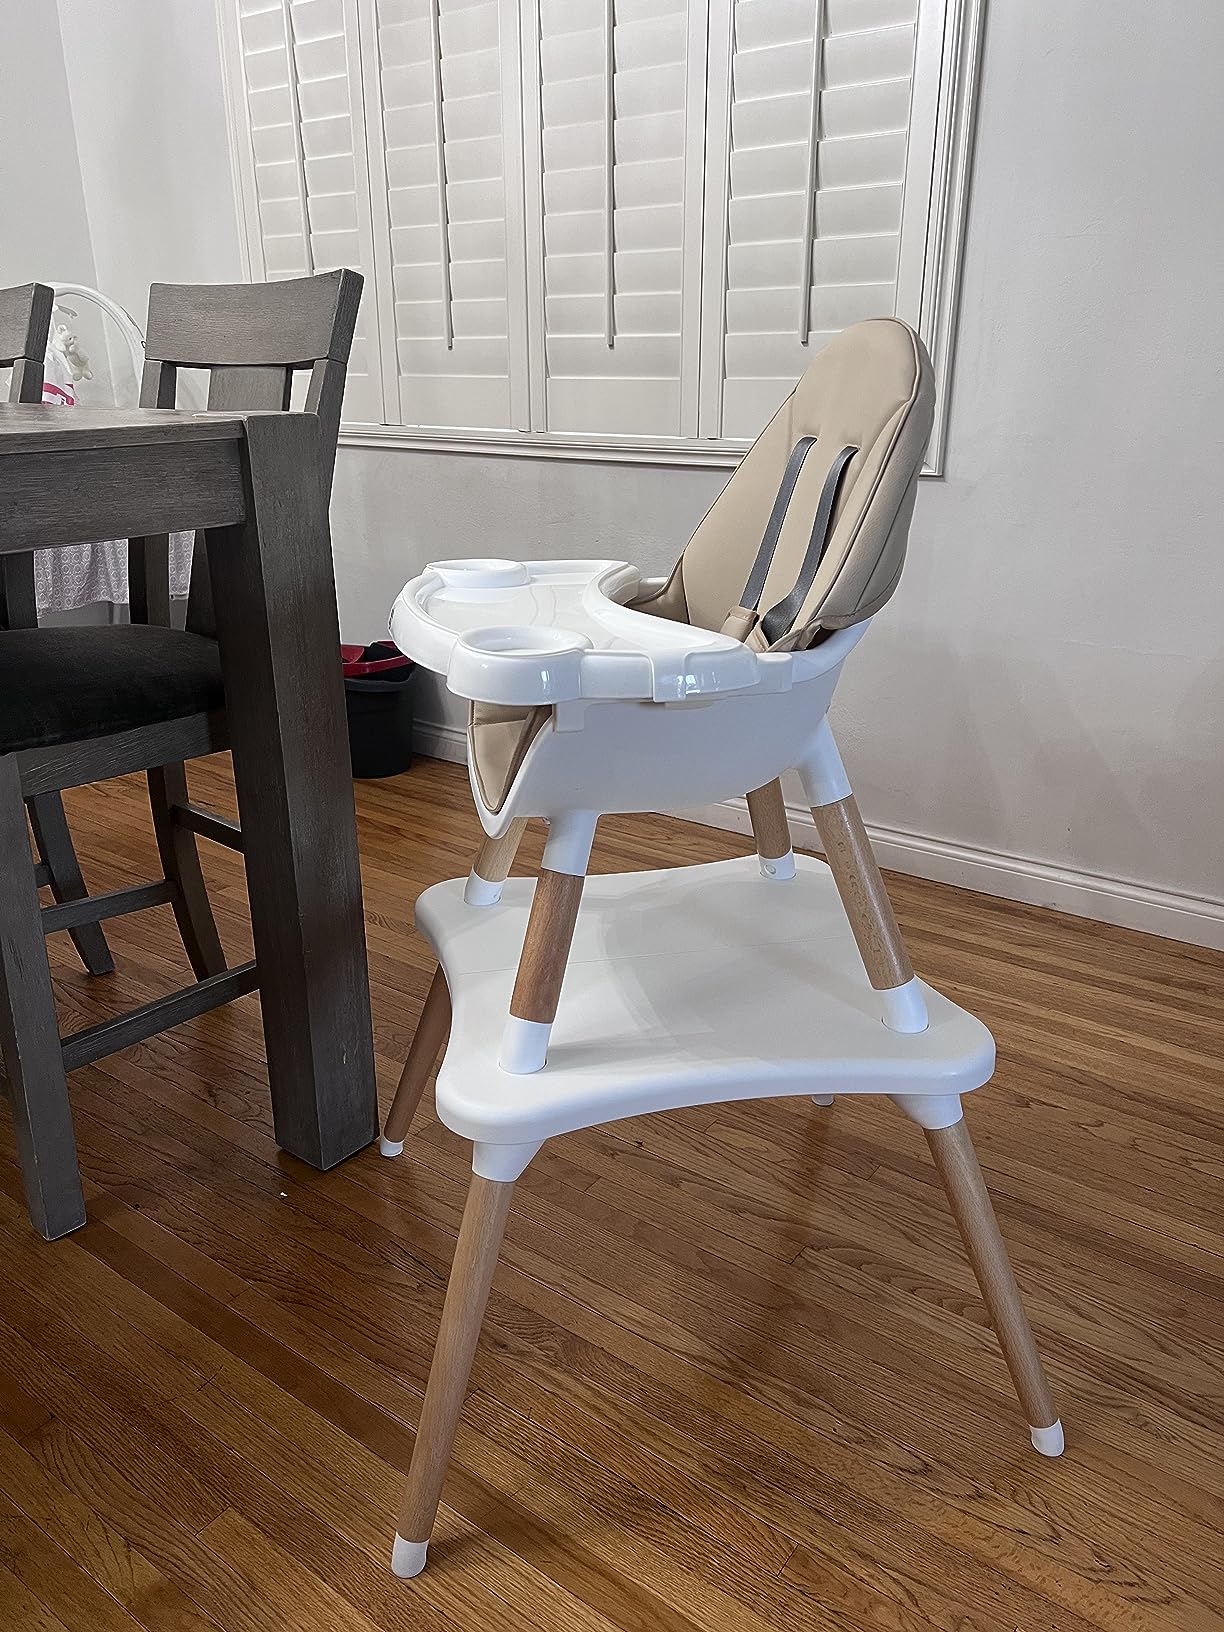 Great High Chair for price